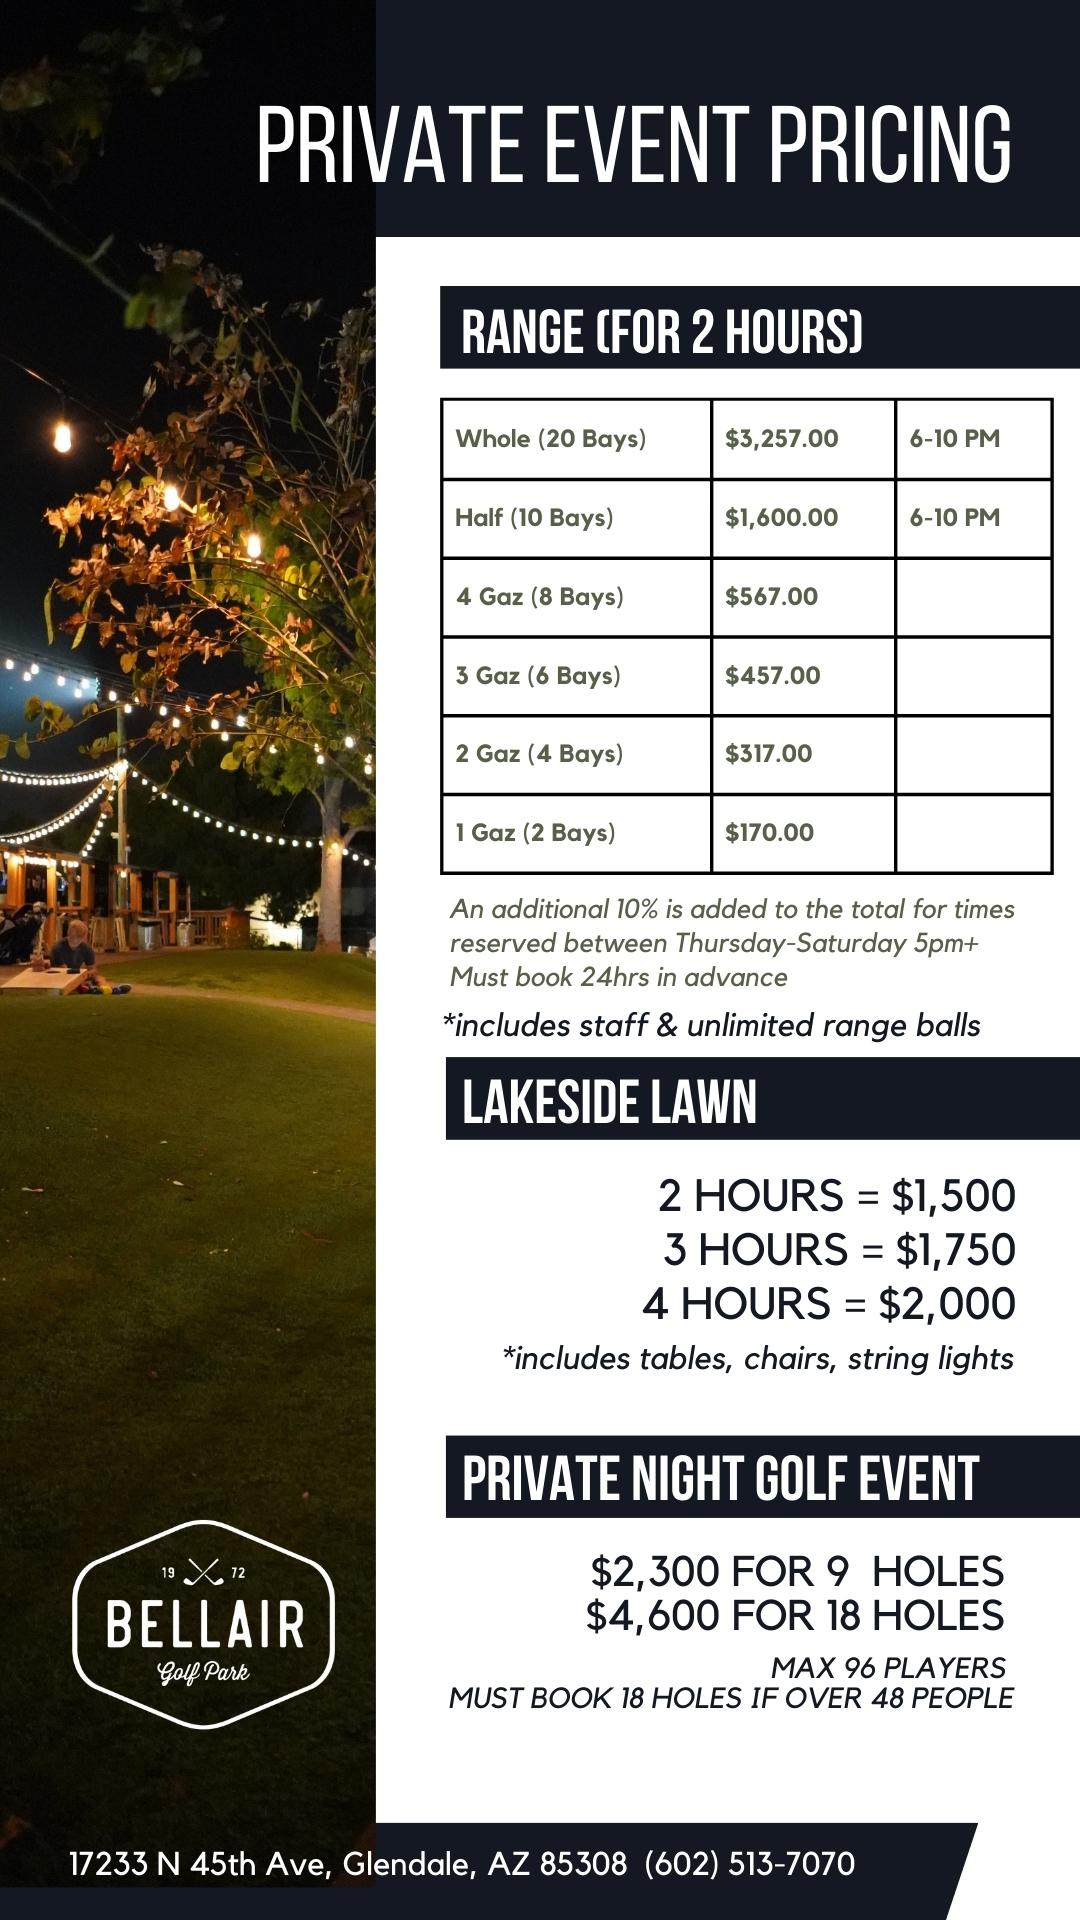 BGP Private Event Pricing